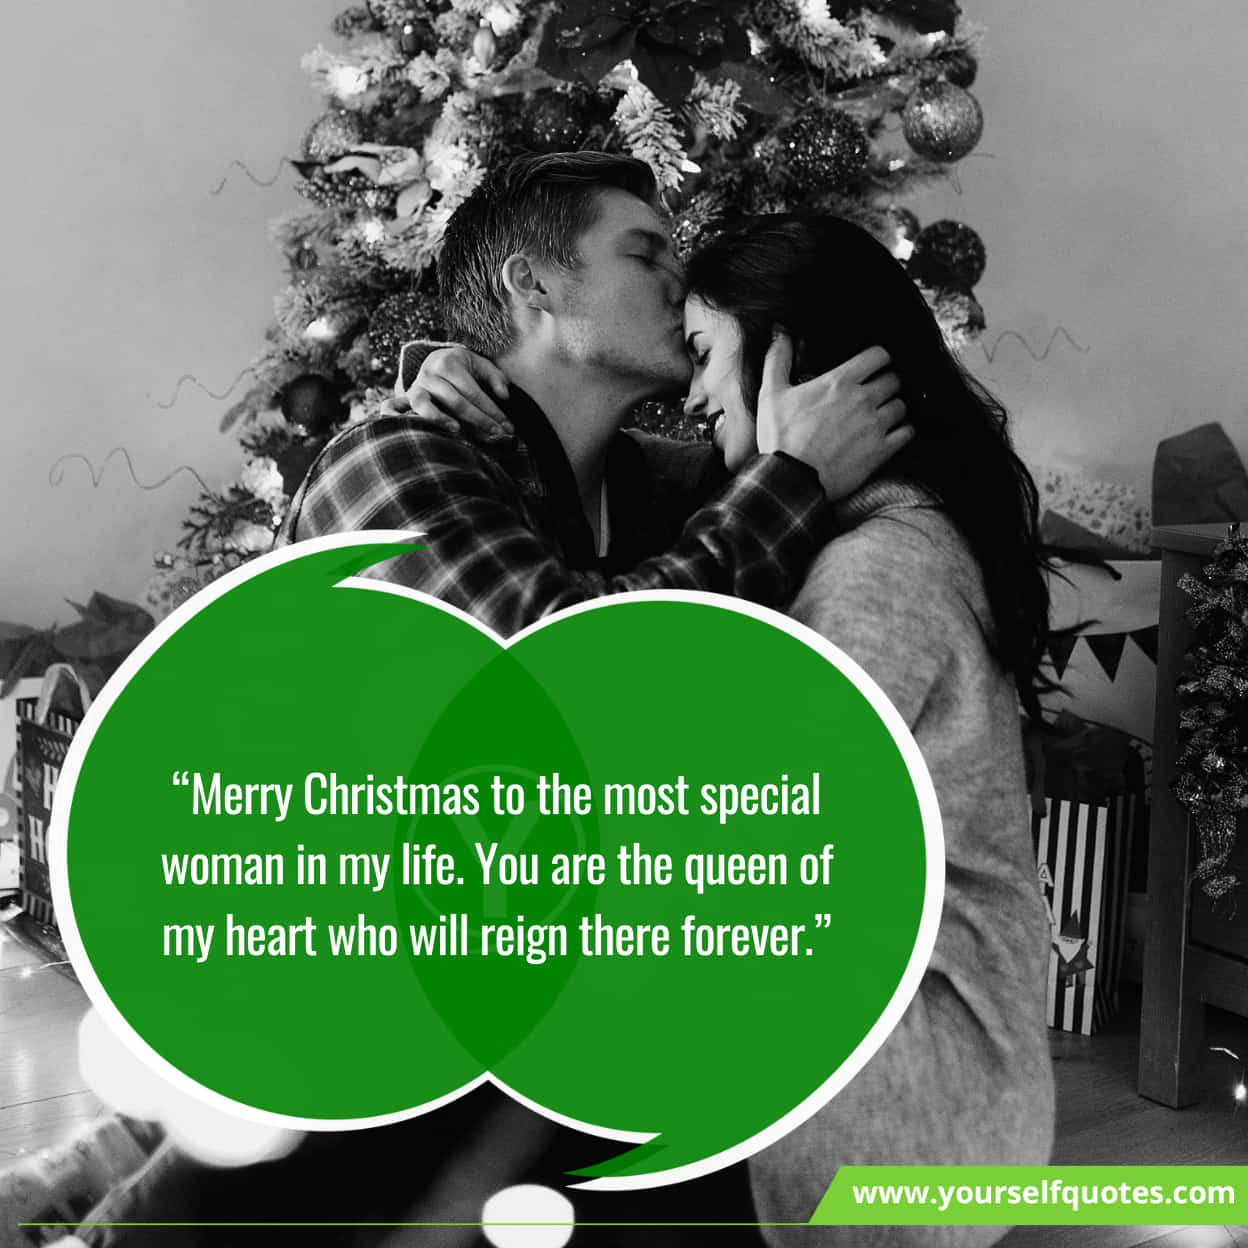 Inspiring Merry Christmas Wishes for Wife